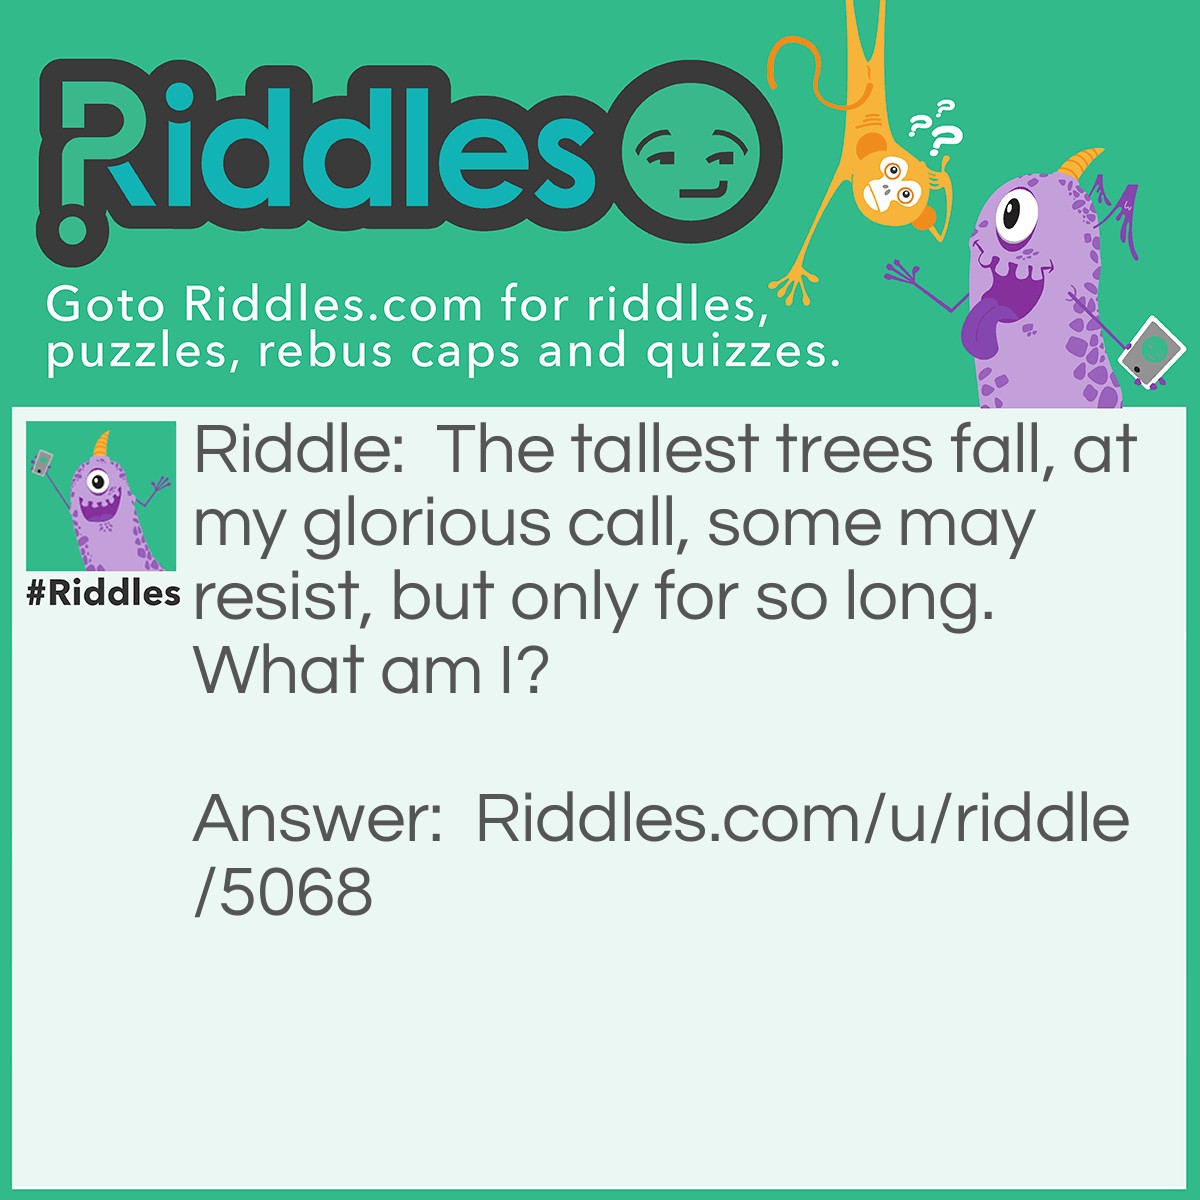 Riddle: The tallest trees fall, at my glorious call, some may resist, but only for so long. What am I? Answer: Gravity.